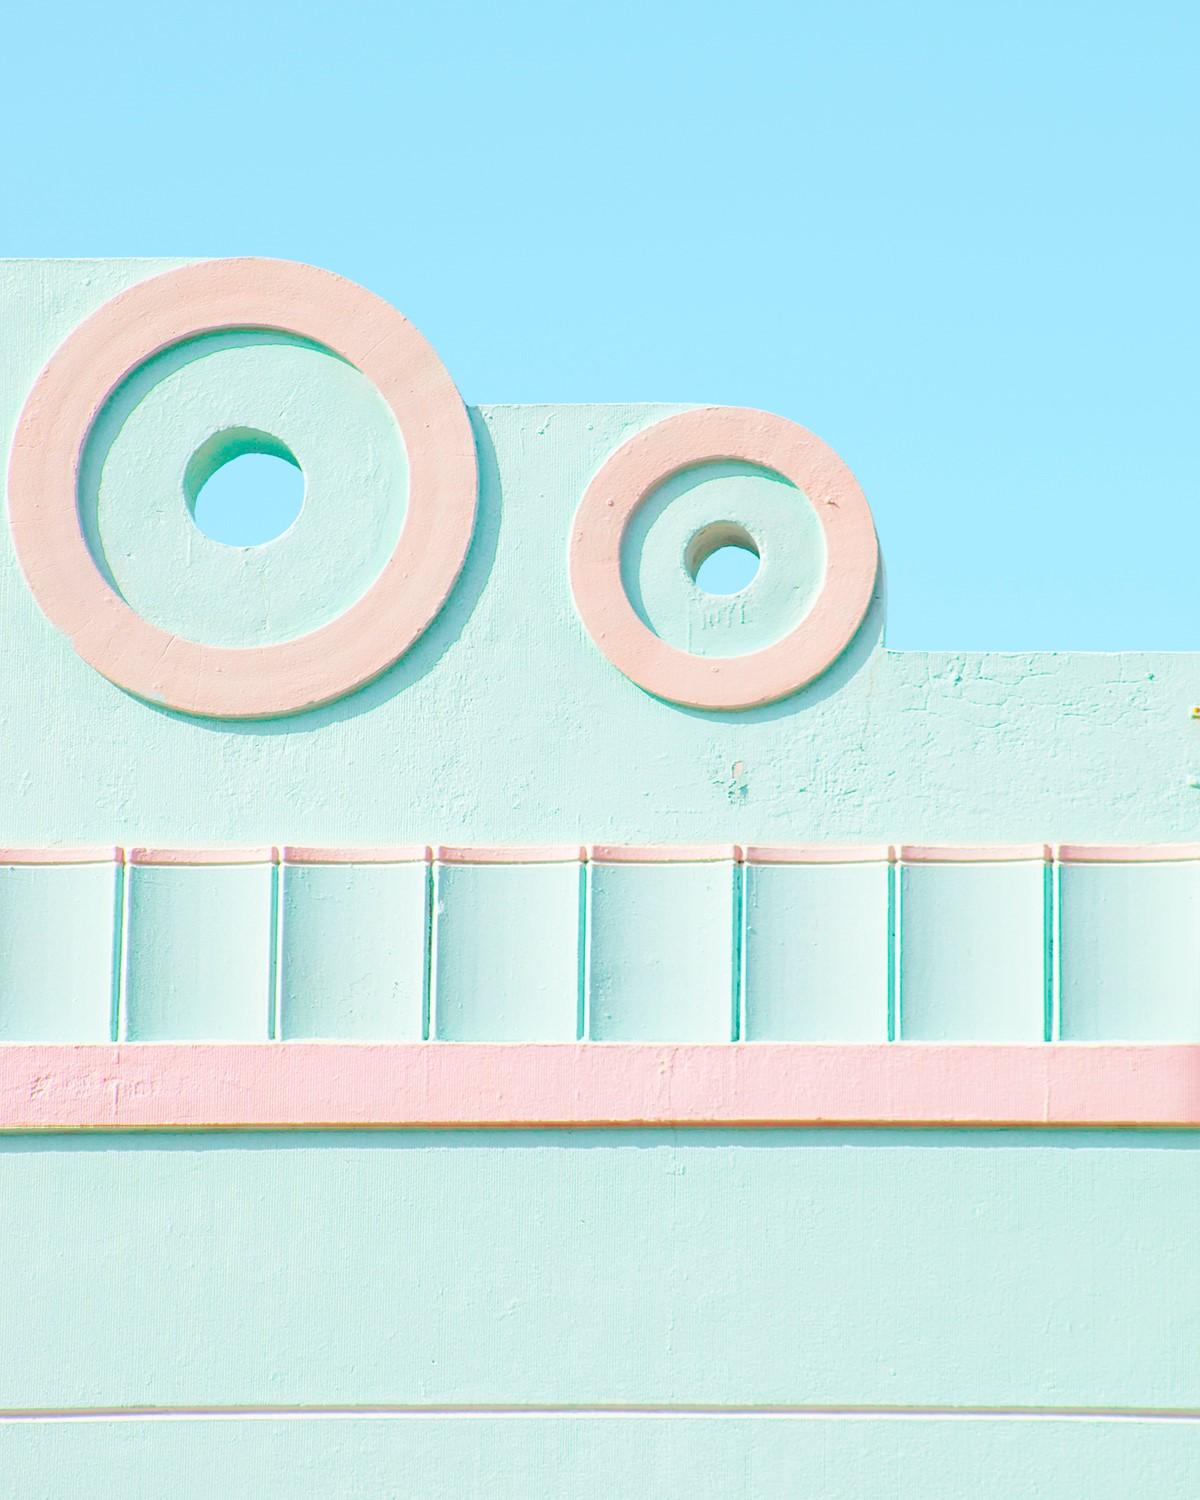 Untitled III, DÉCO series by Matthieu Venot - Close-Up Photography, Architecture